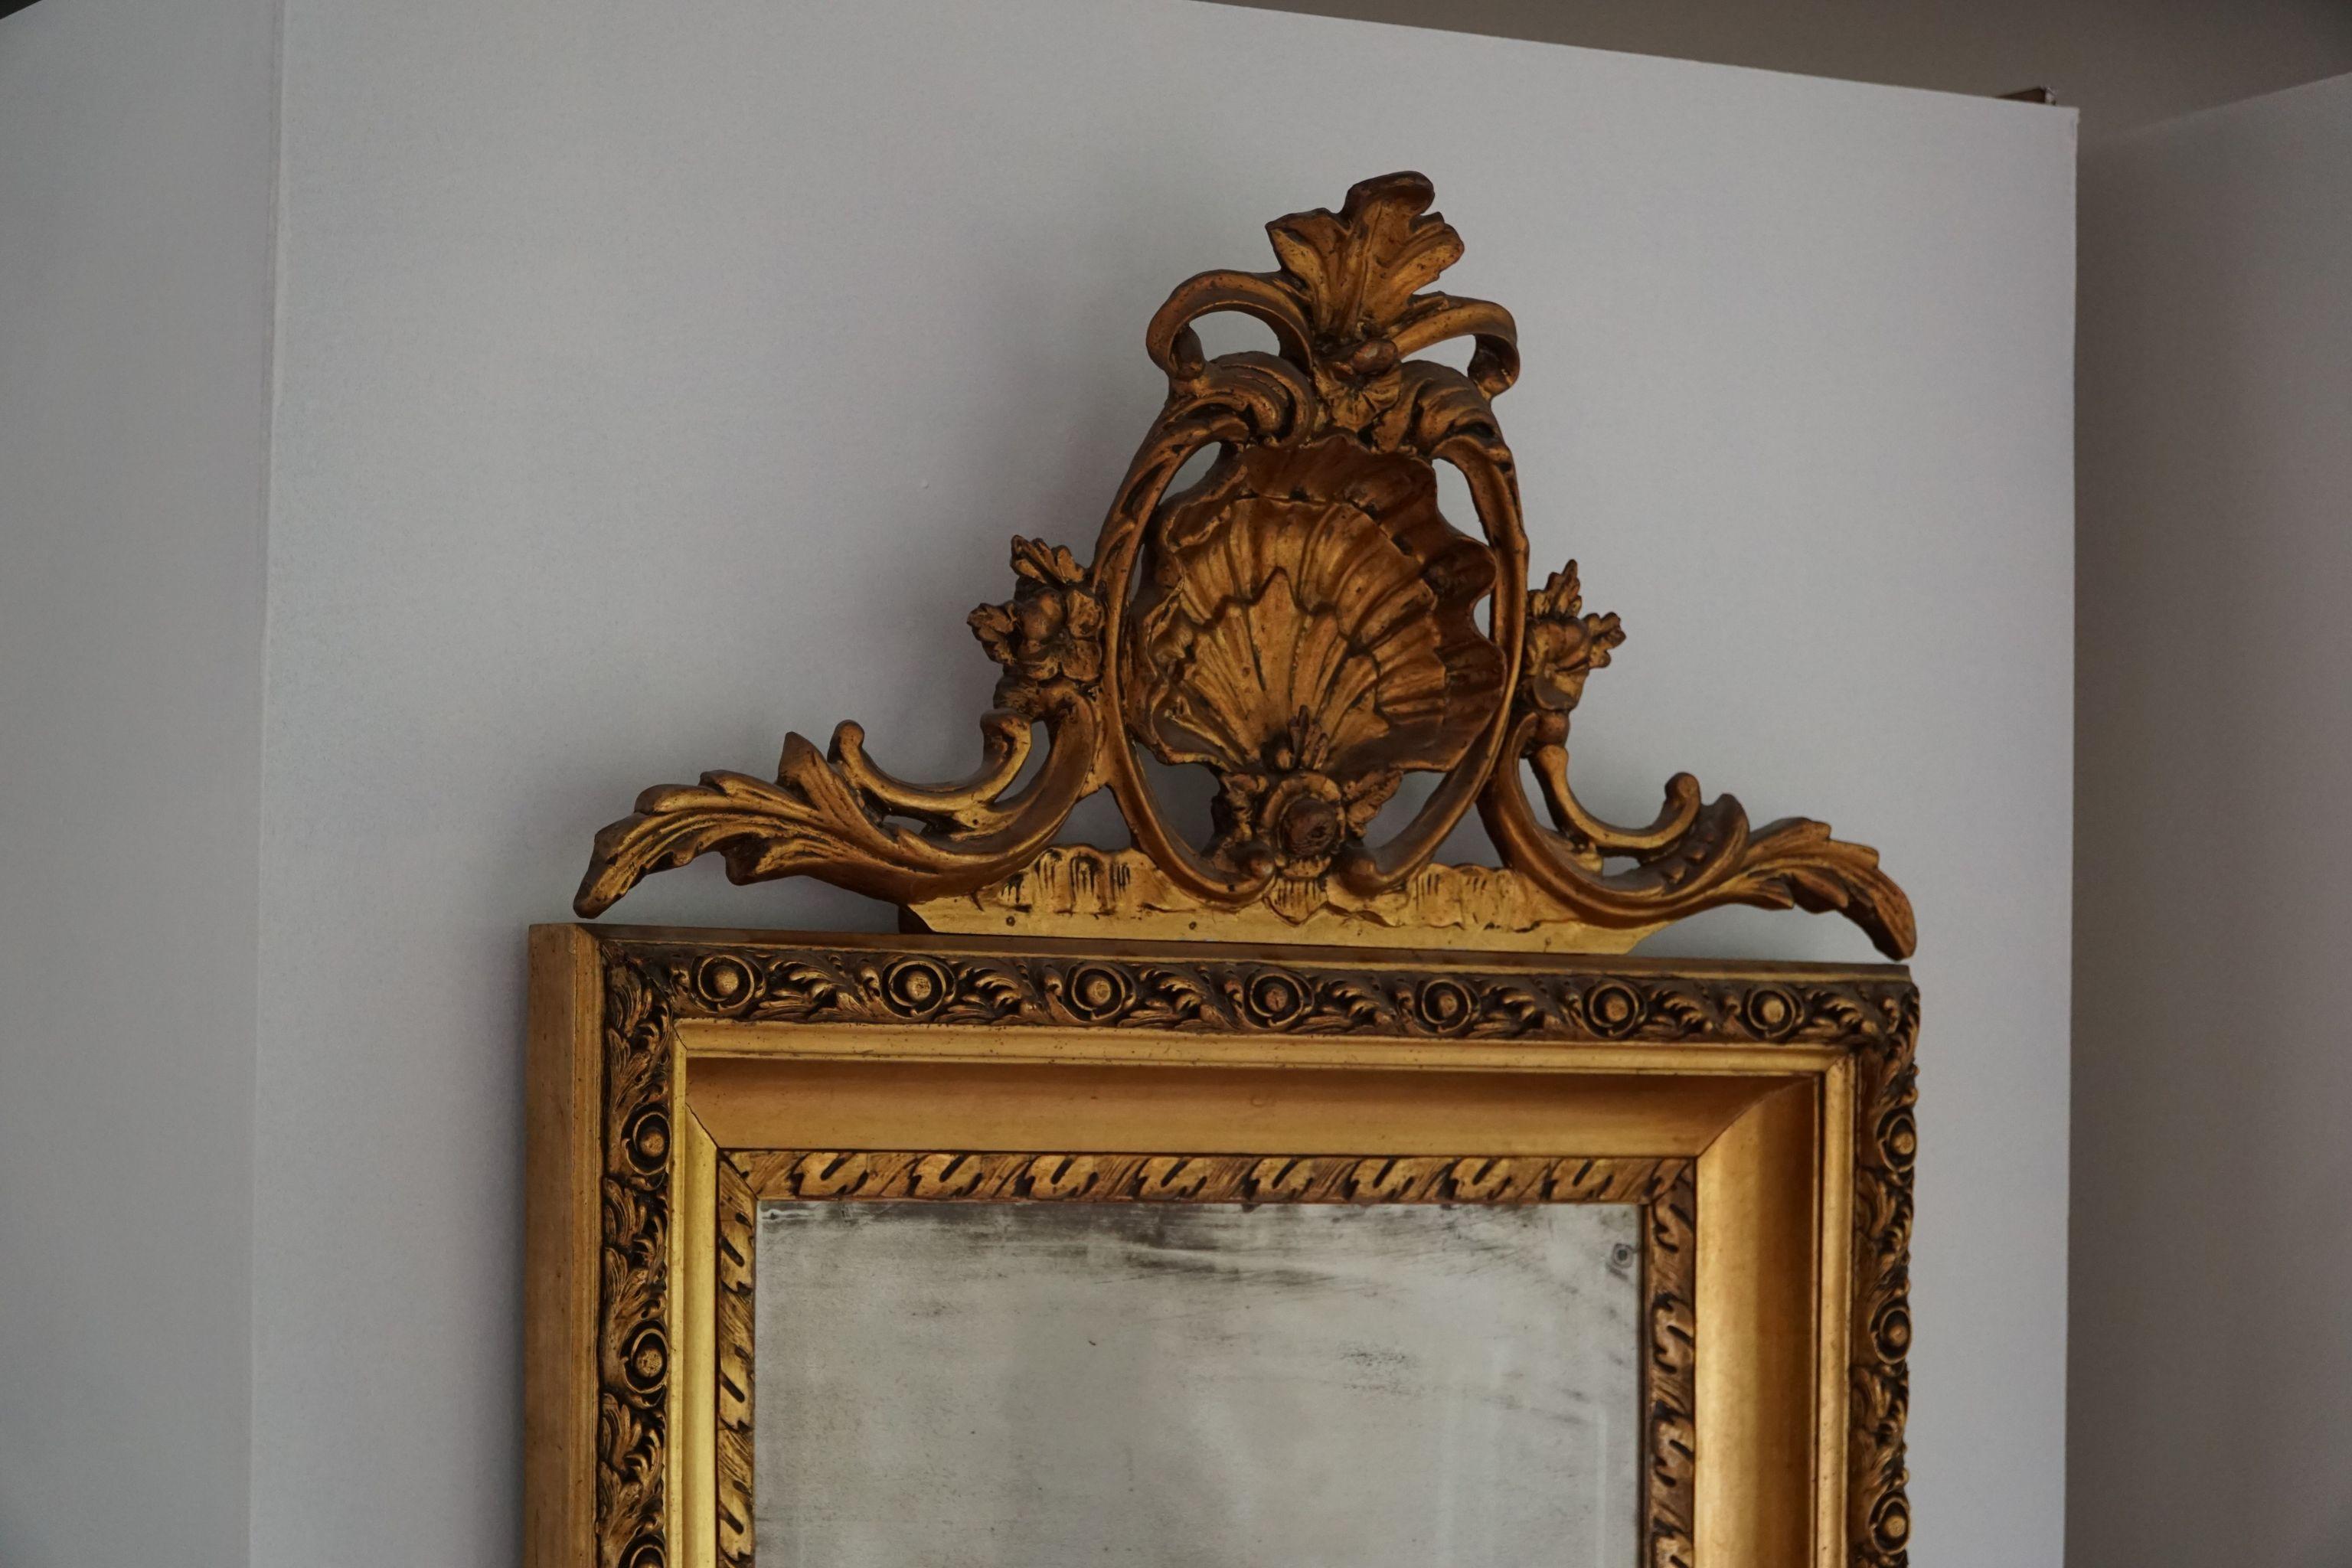 Antique Danish Mid-19th Century Rococo Gold Plated Mirror In Good Condition For Sale In Odense, DK